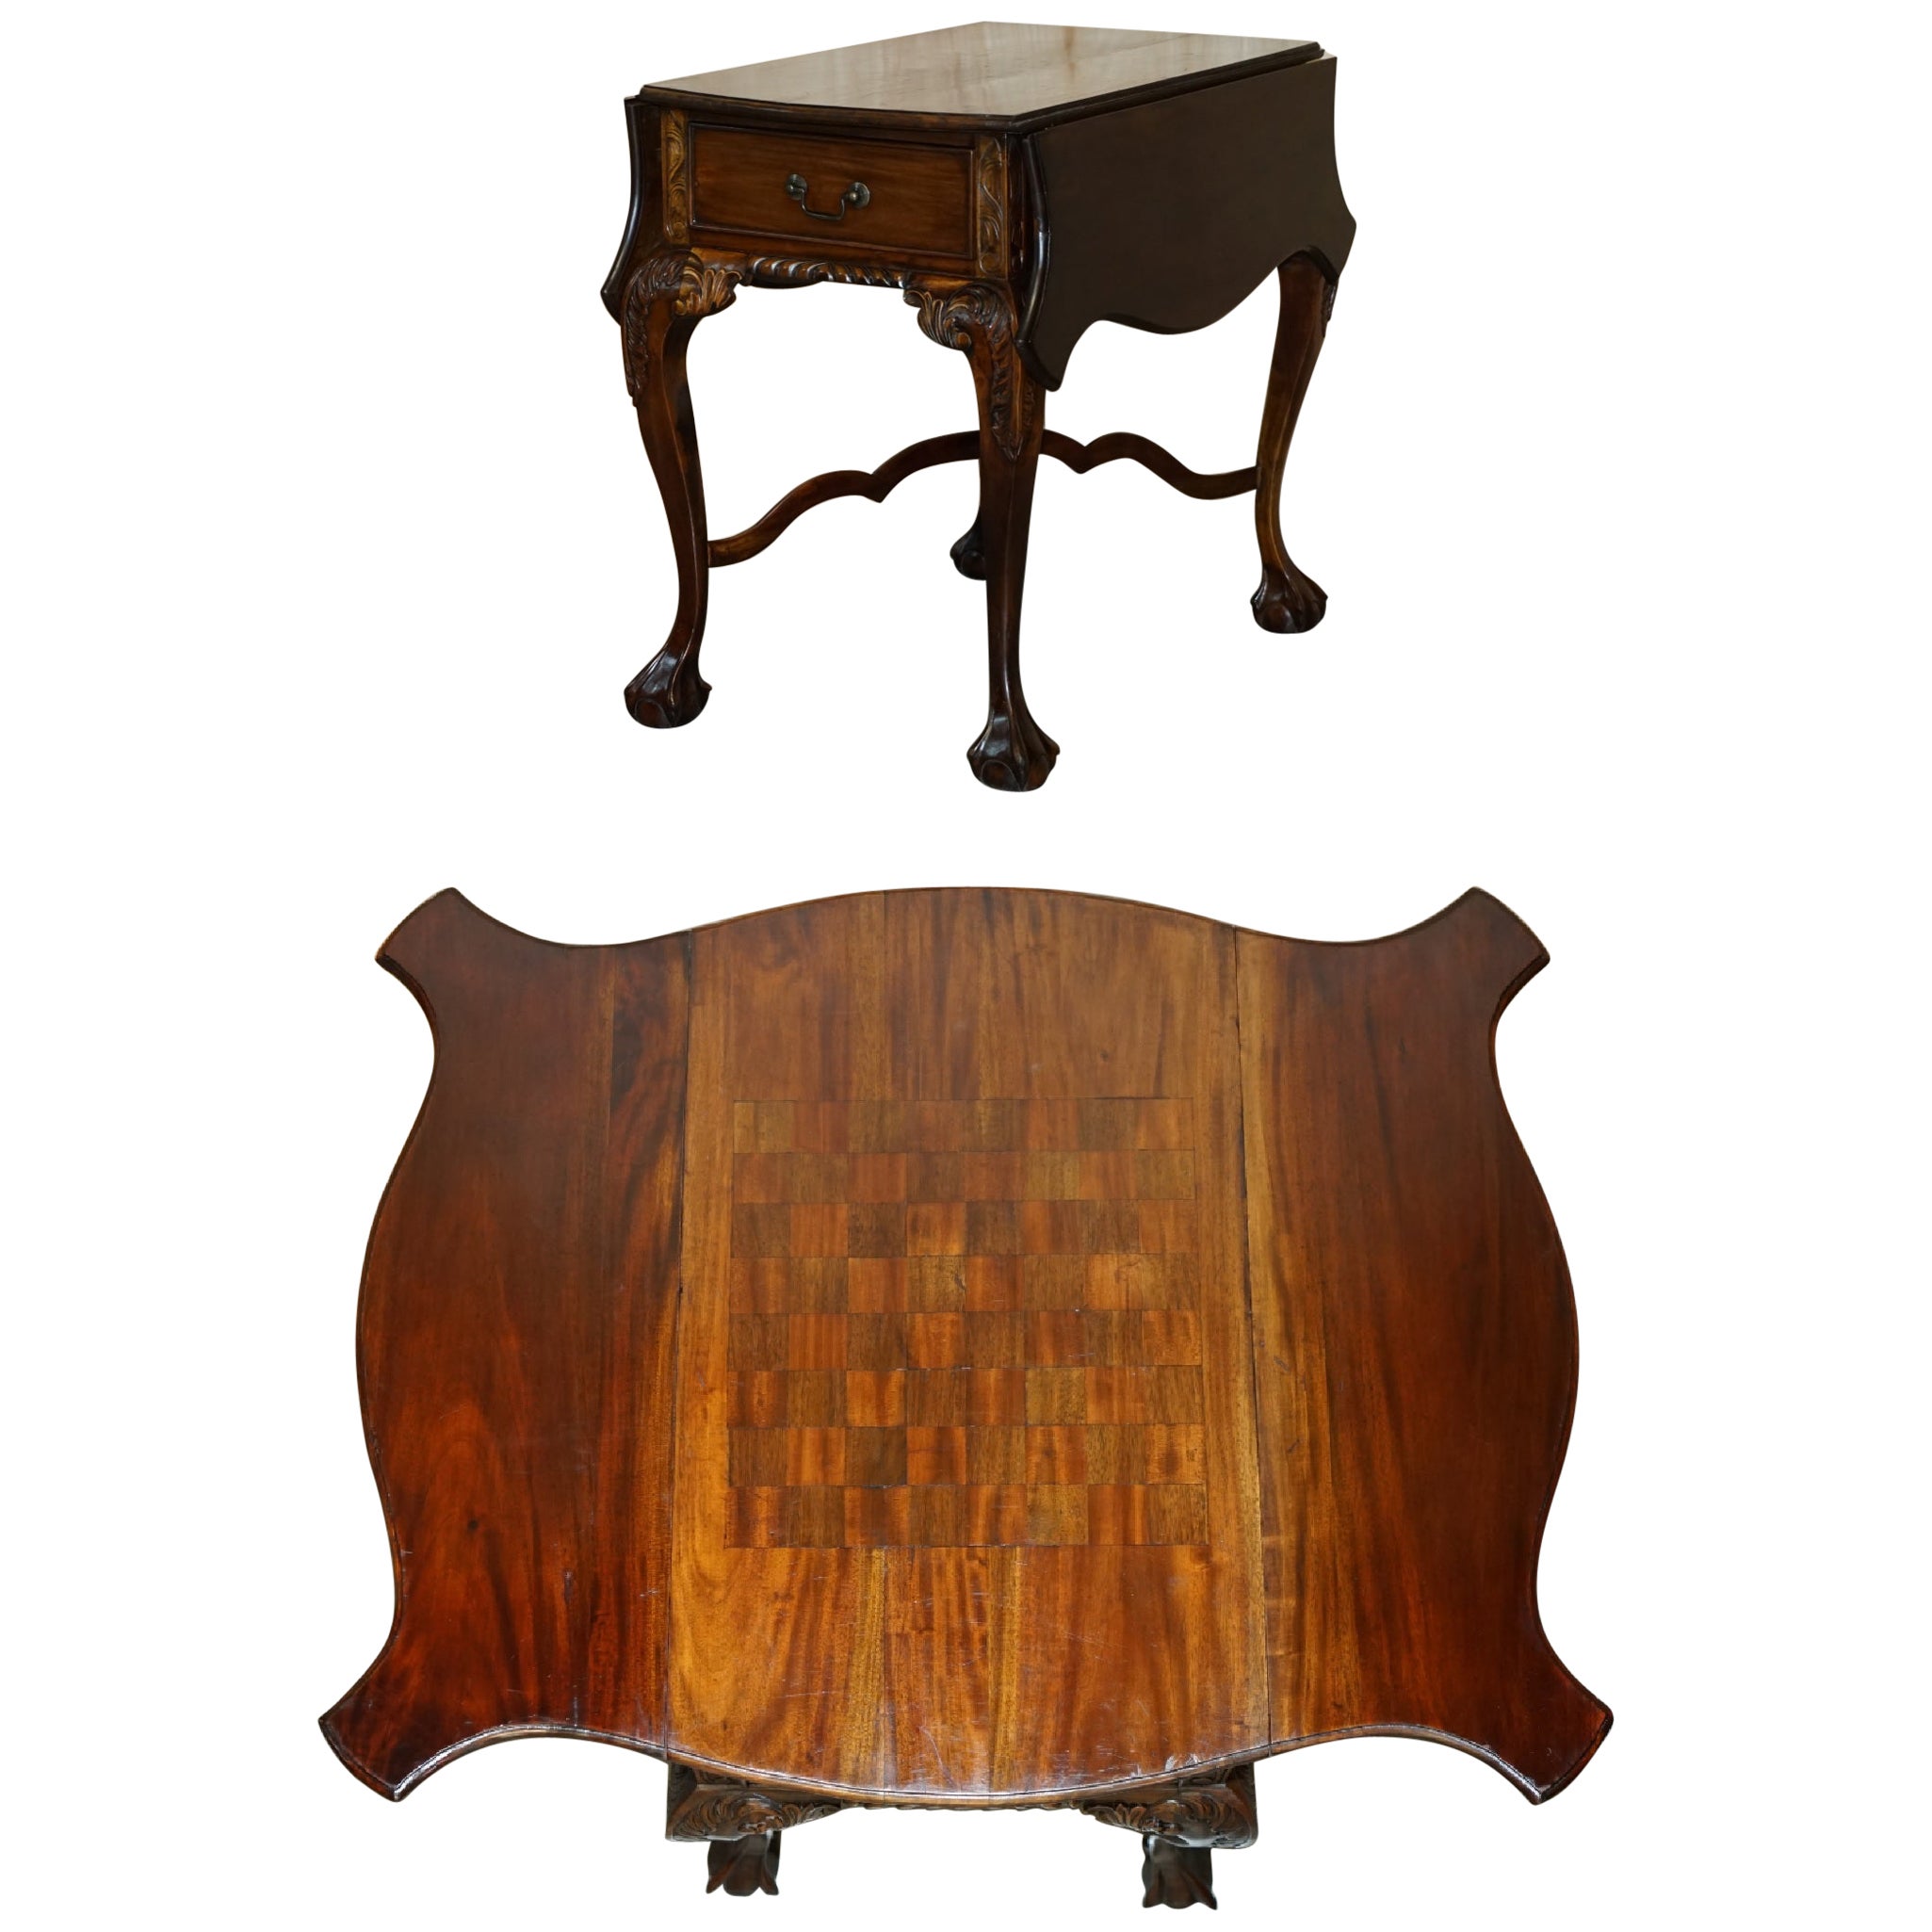 EXQUISITE THOMAS CHIPPENDALE STYLE CLAW & BALL FEET EXTENDiNG CHESS BOARD TABLE For Sale